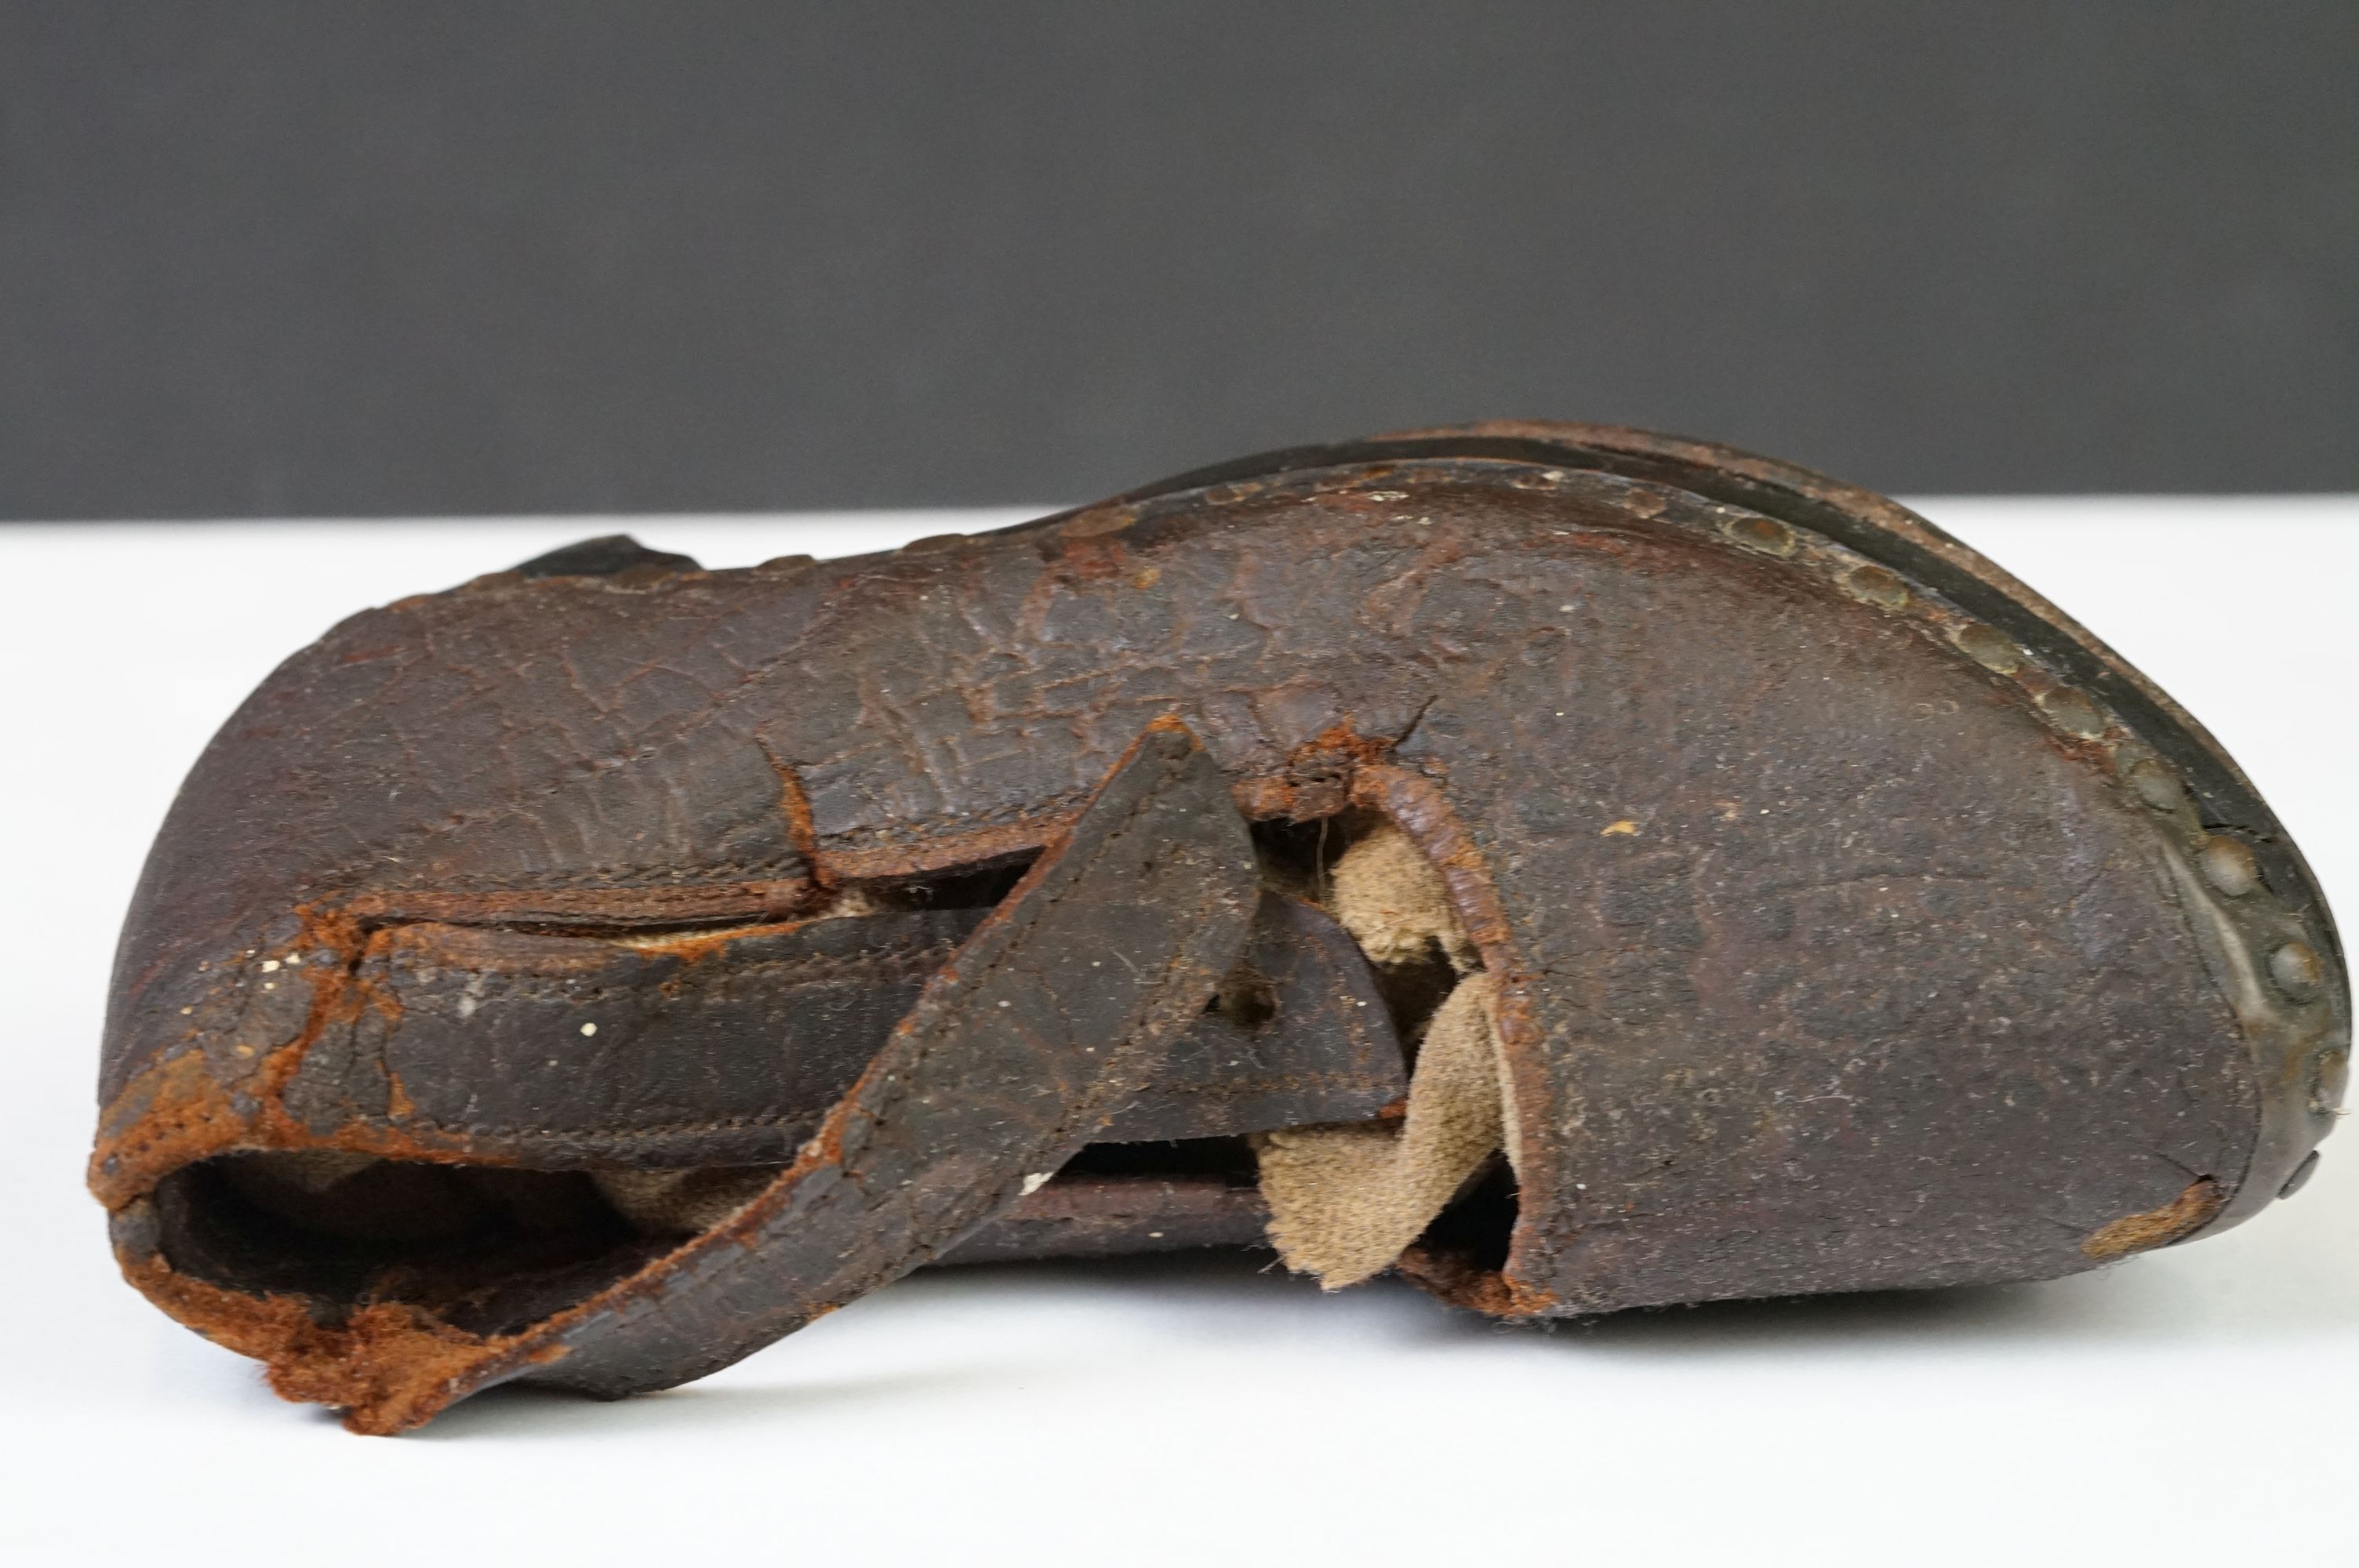 A pair of 'Latchet' leather Childs shoes c.1650-1700 - Image 9 of 10